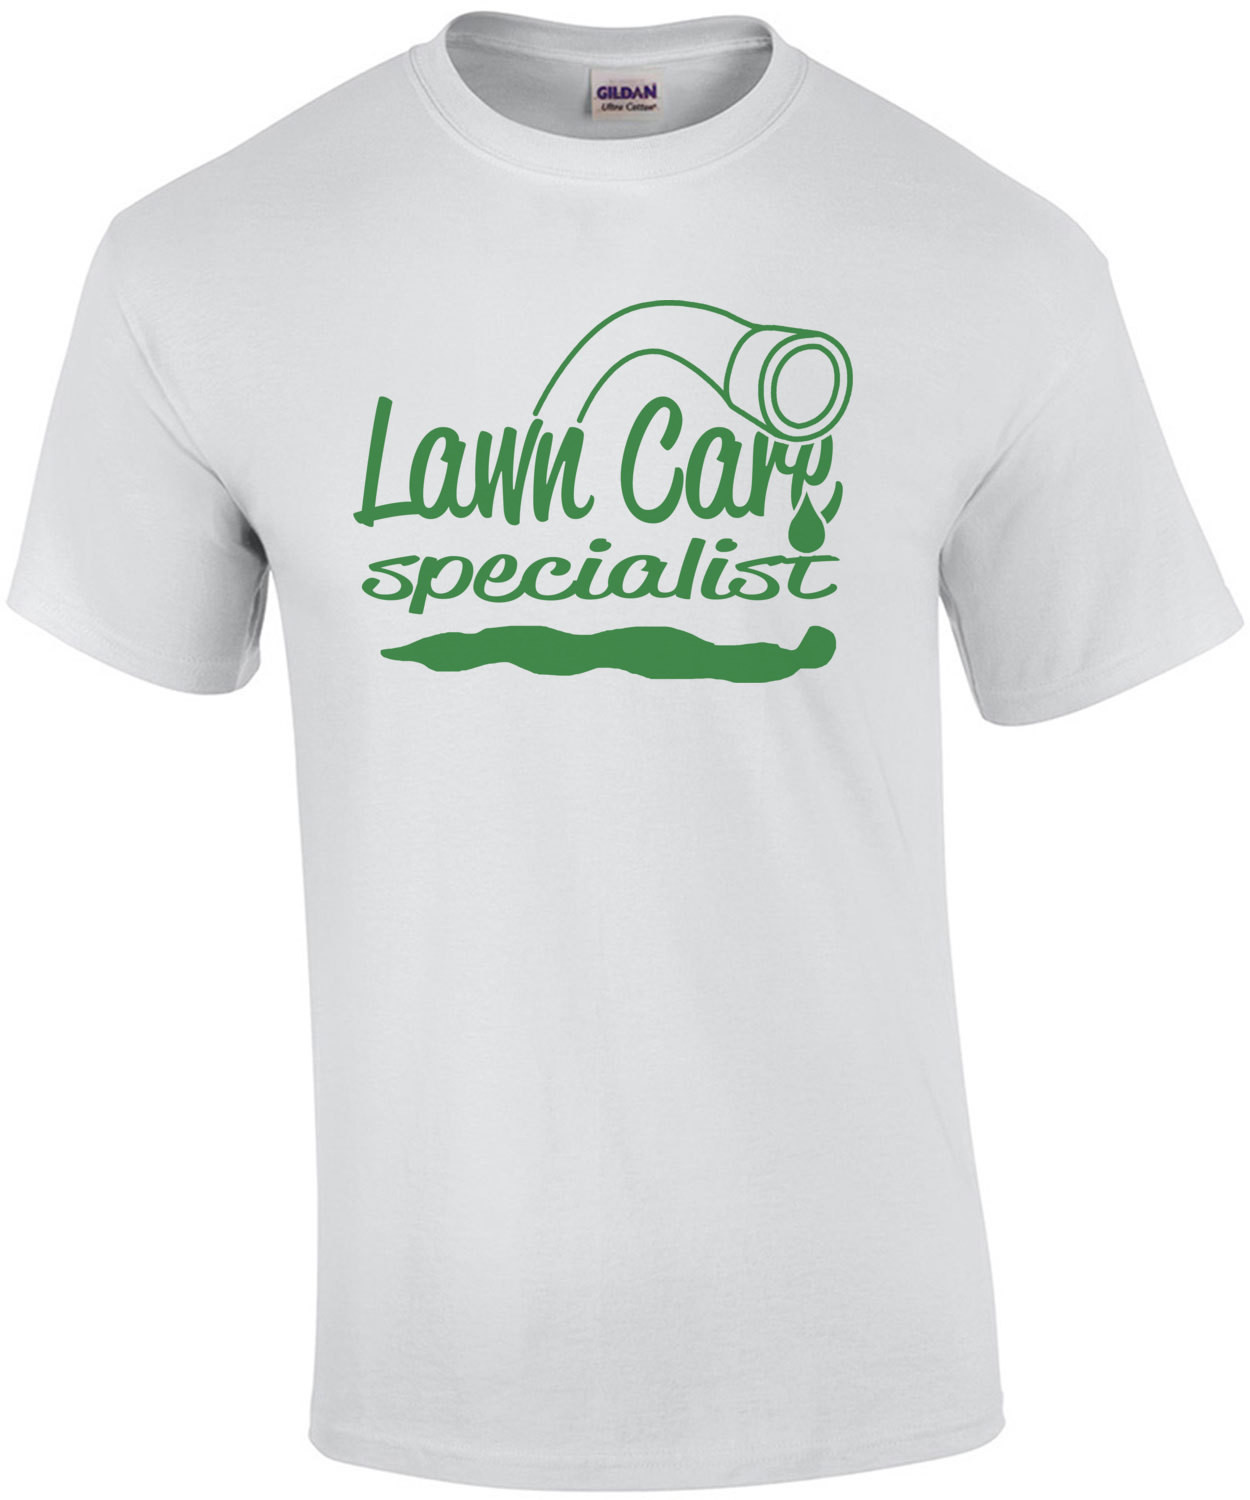 Lawn Care Specialist T-Shirt